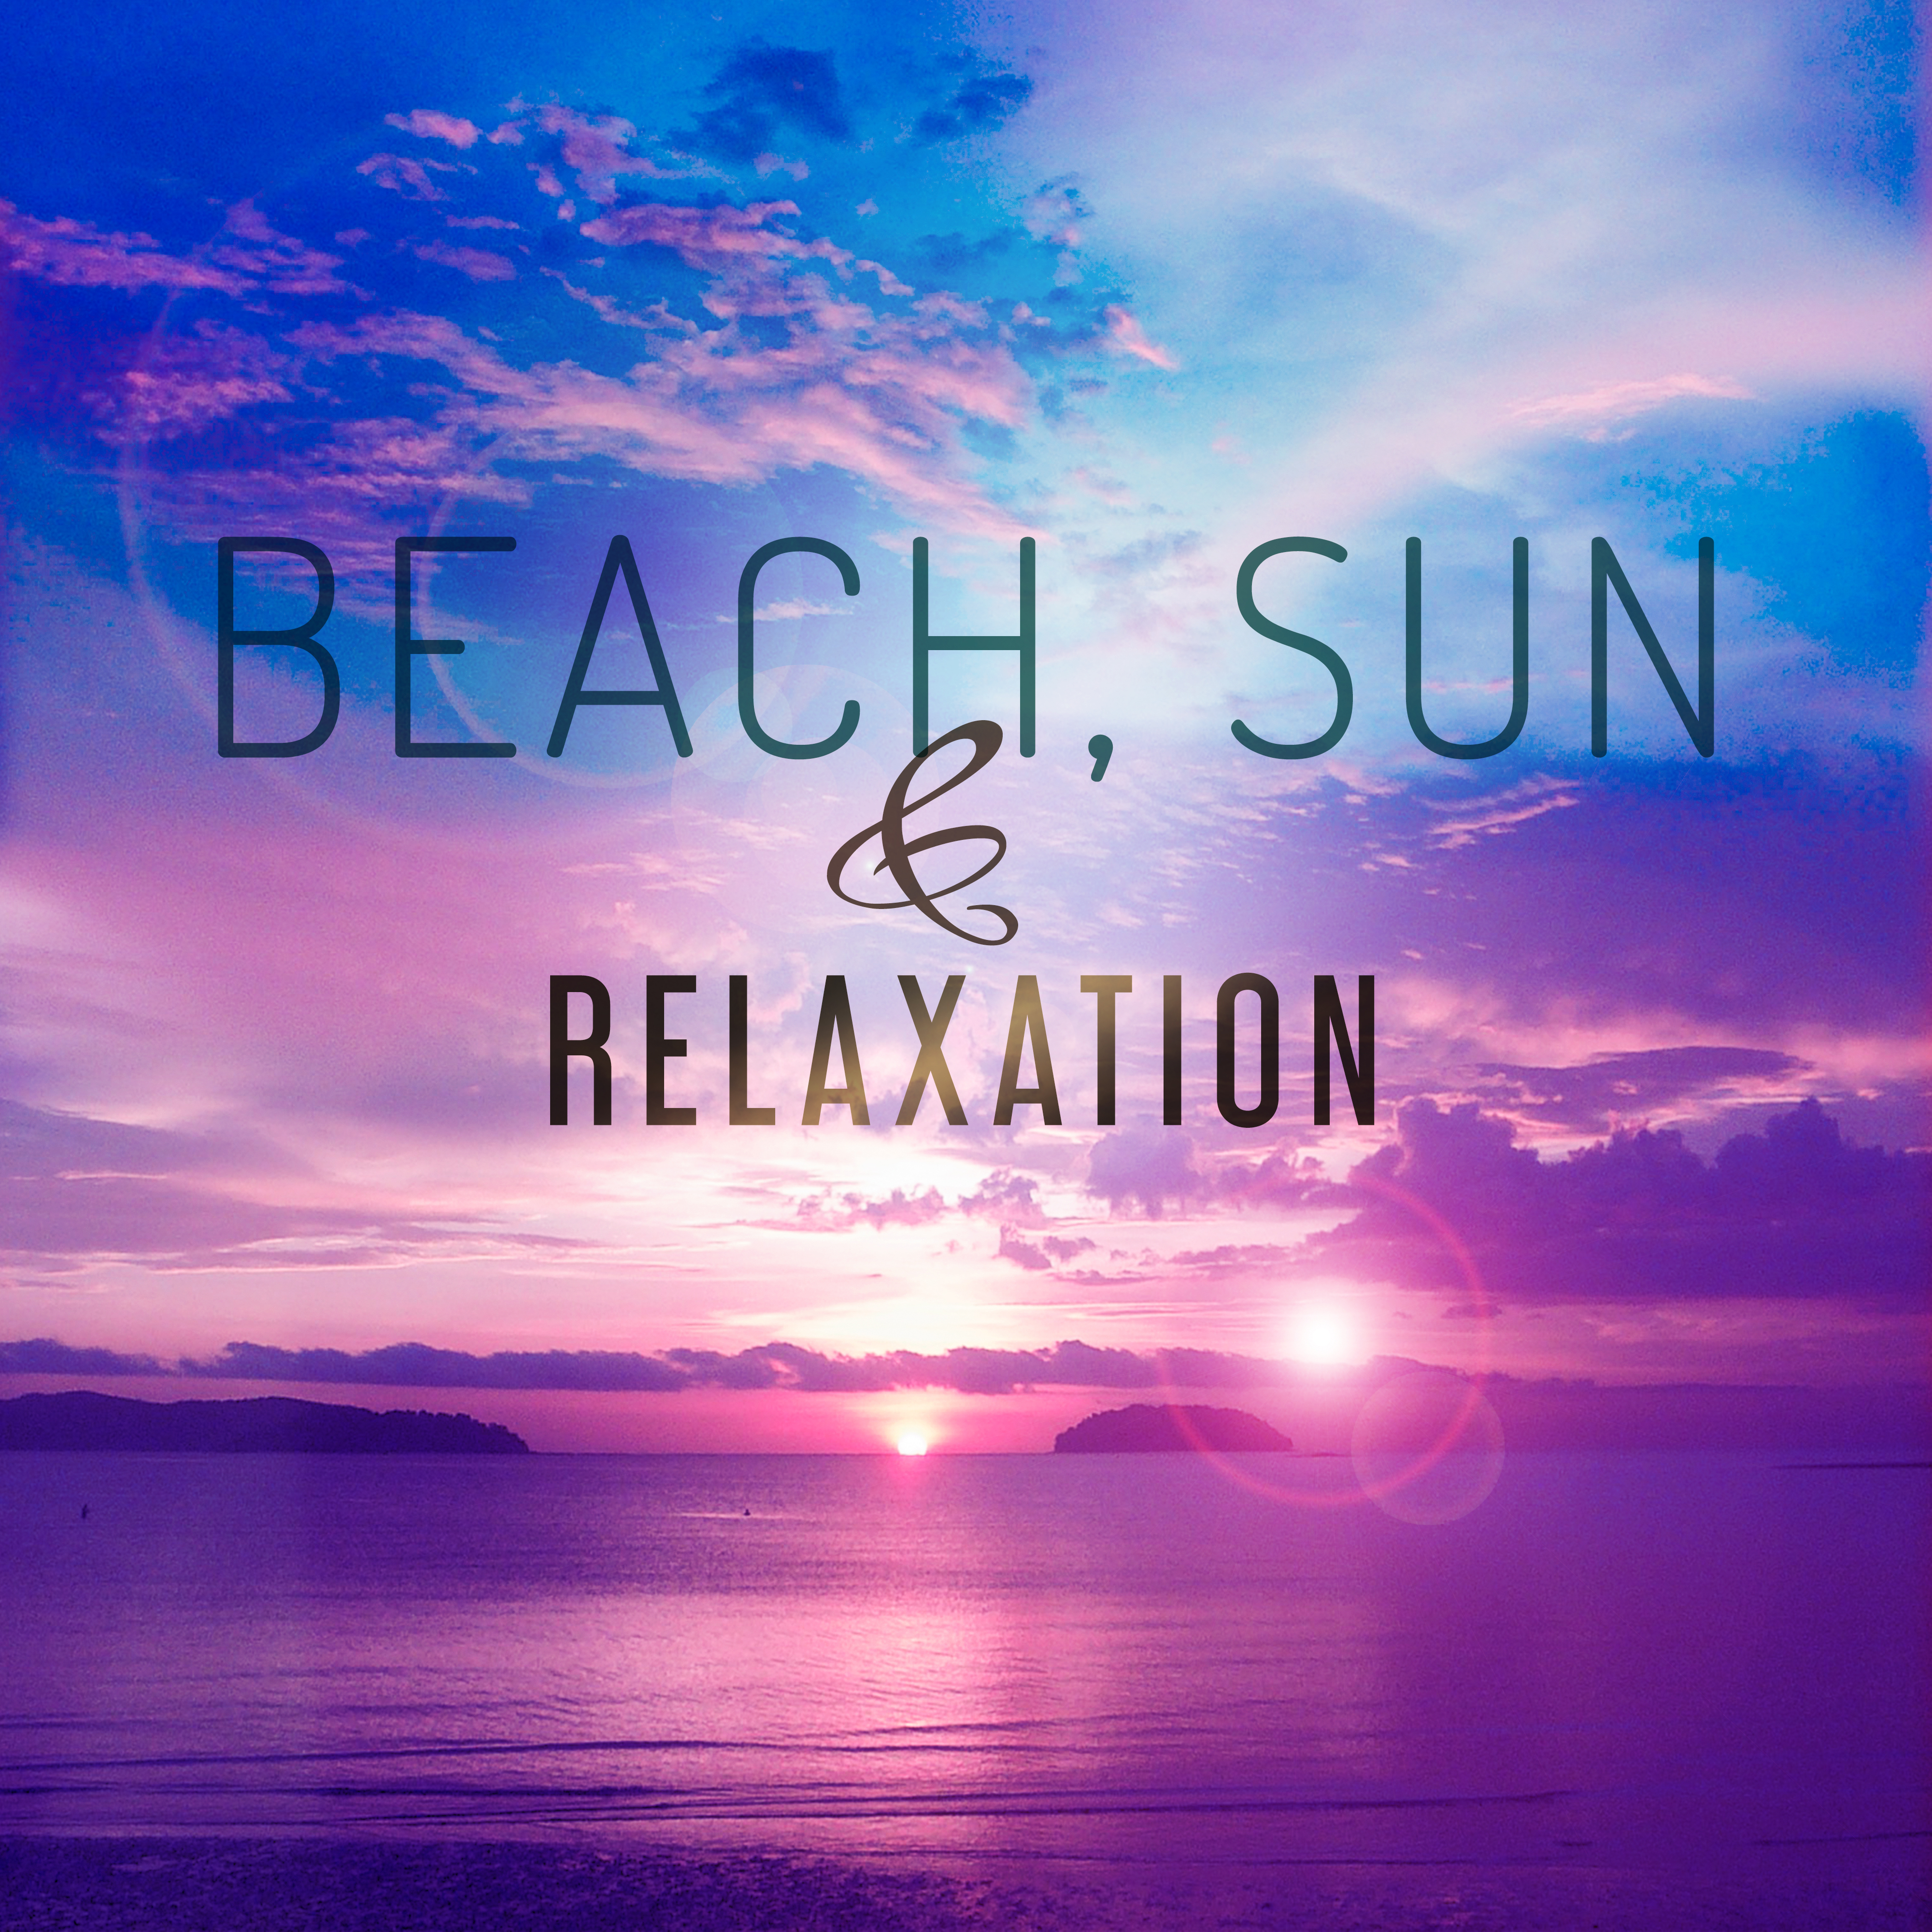 Beach, Sun & Relaxation – Best Chill Out Music, Summer in Ibiza, Relax Under Palms, Beach Chill, Peaceful Music, Good Mood